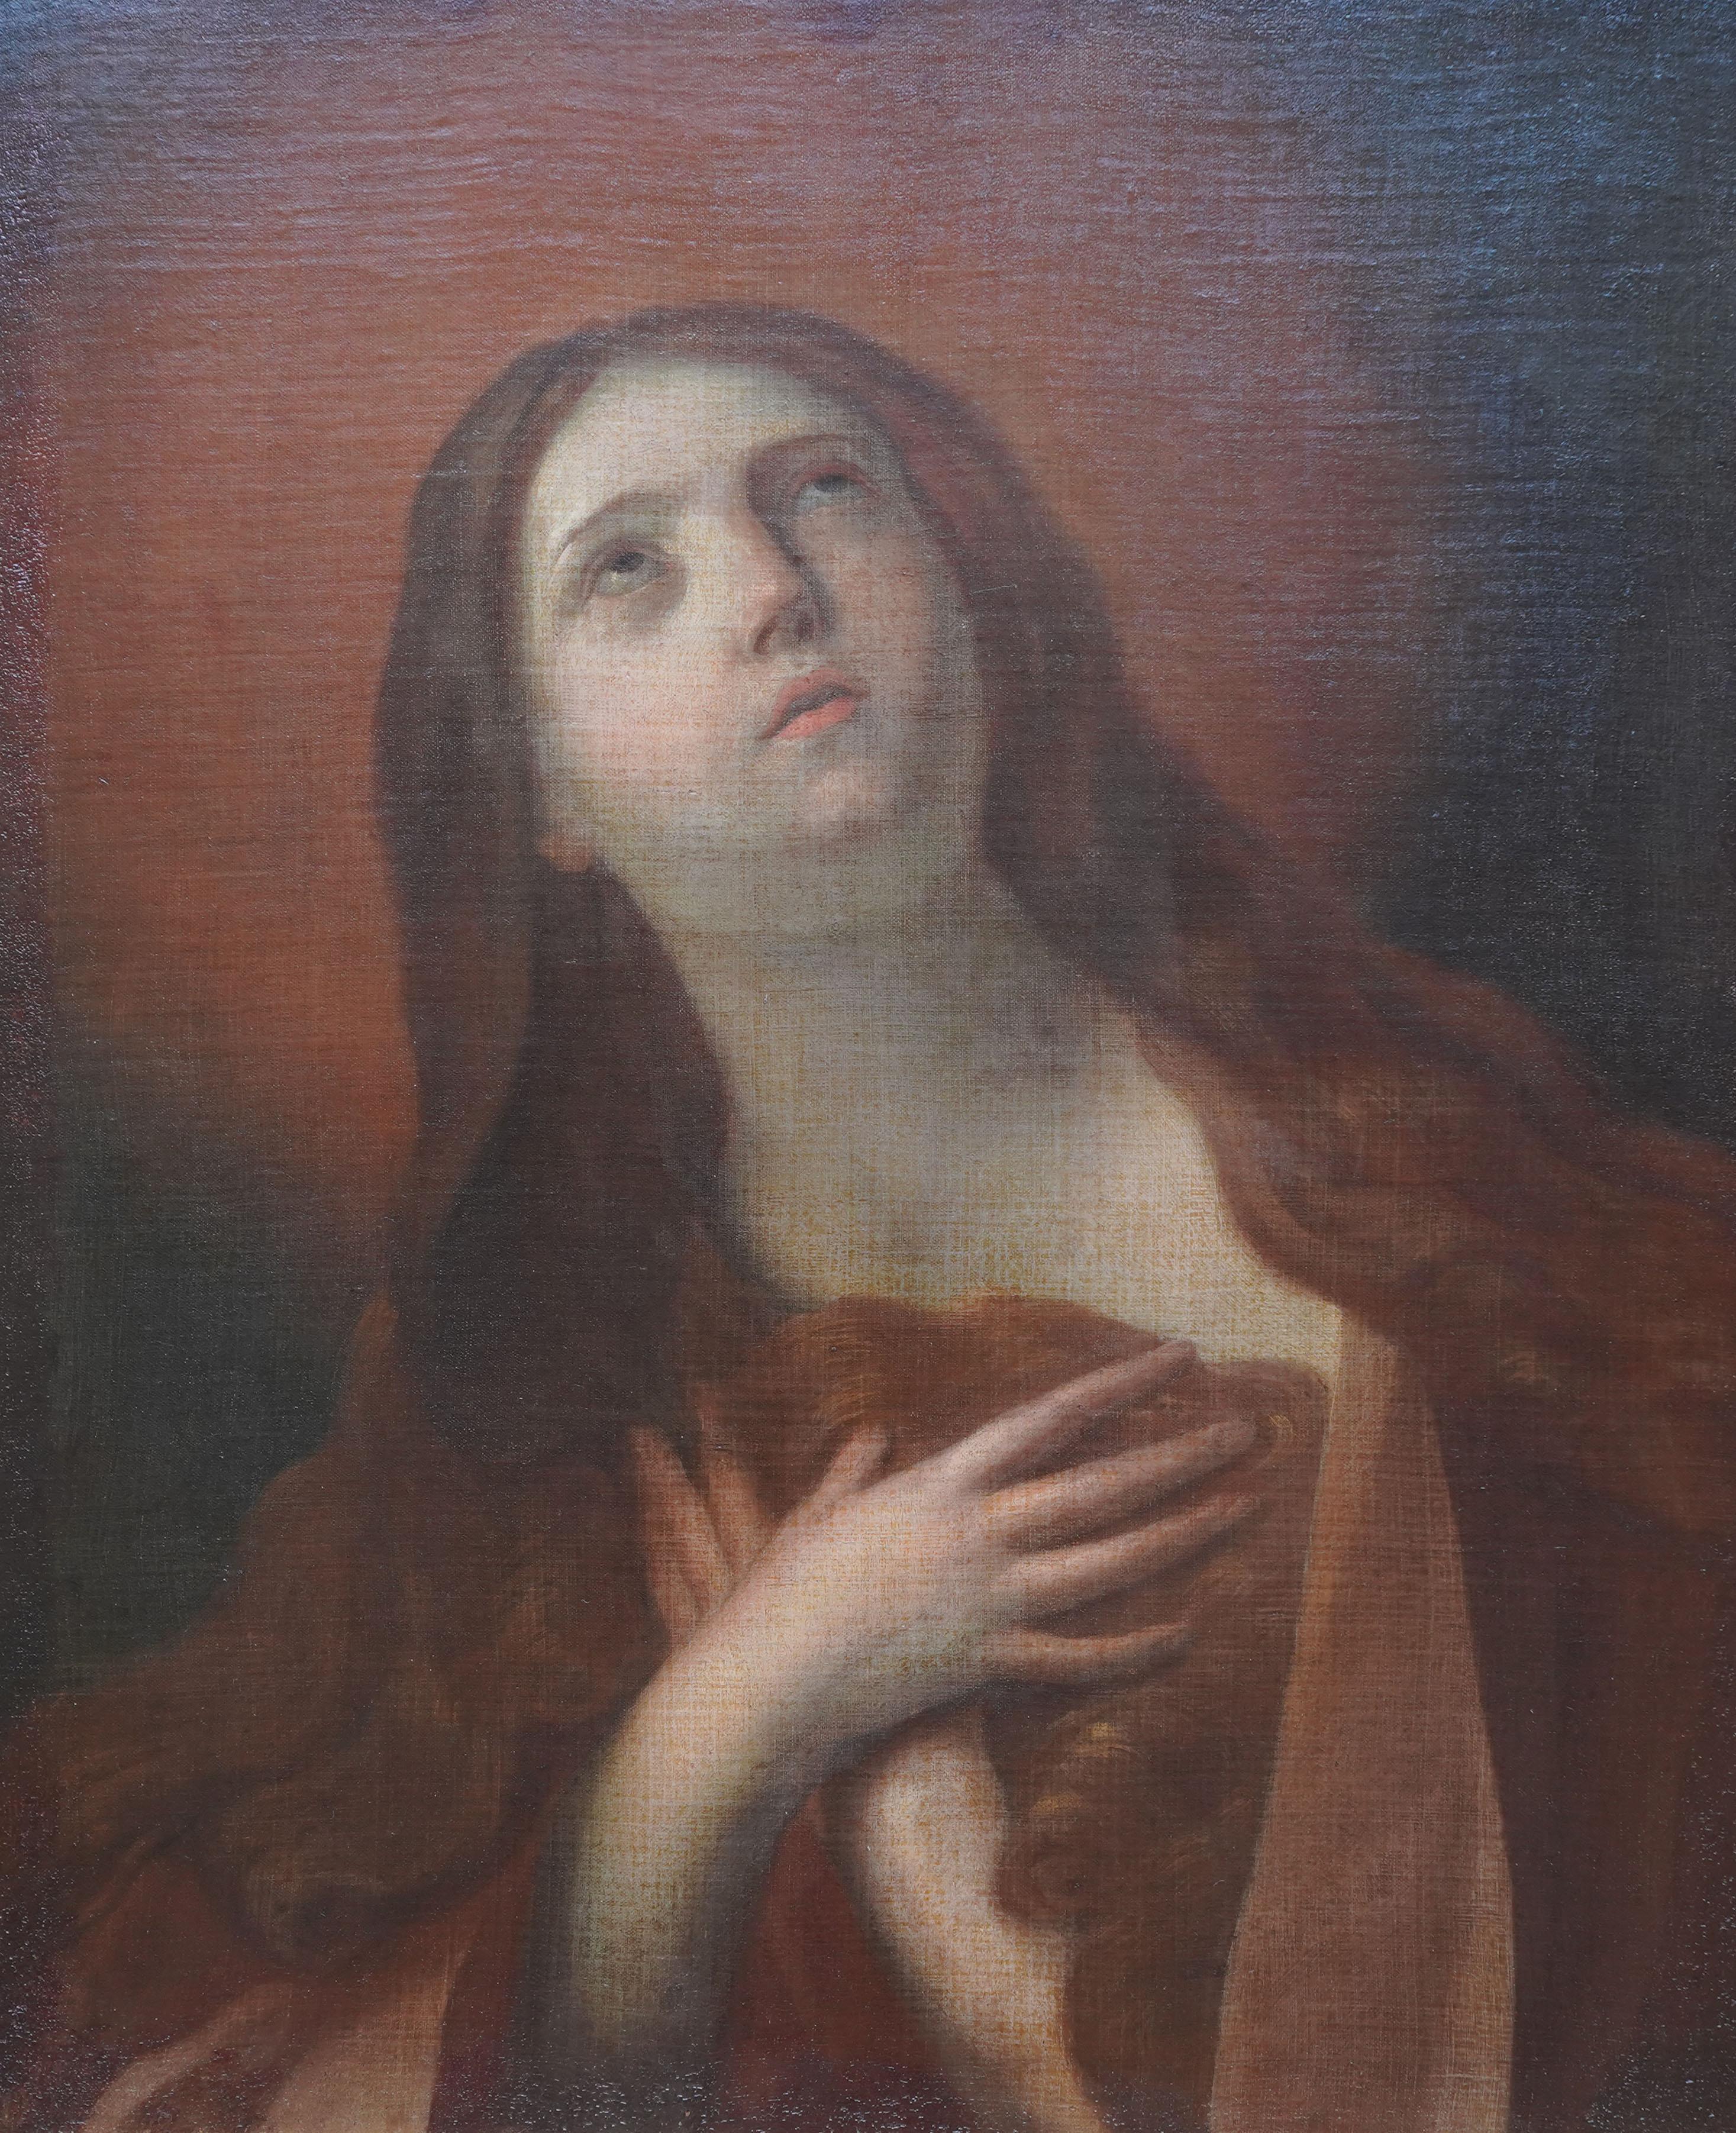 The Penitent Mary Magdalene - Old Master religious art portrait oil painting - Painting by Guido Reni